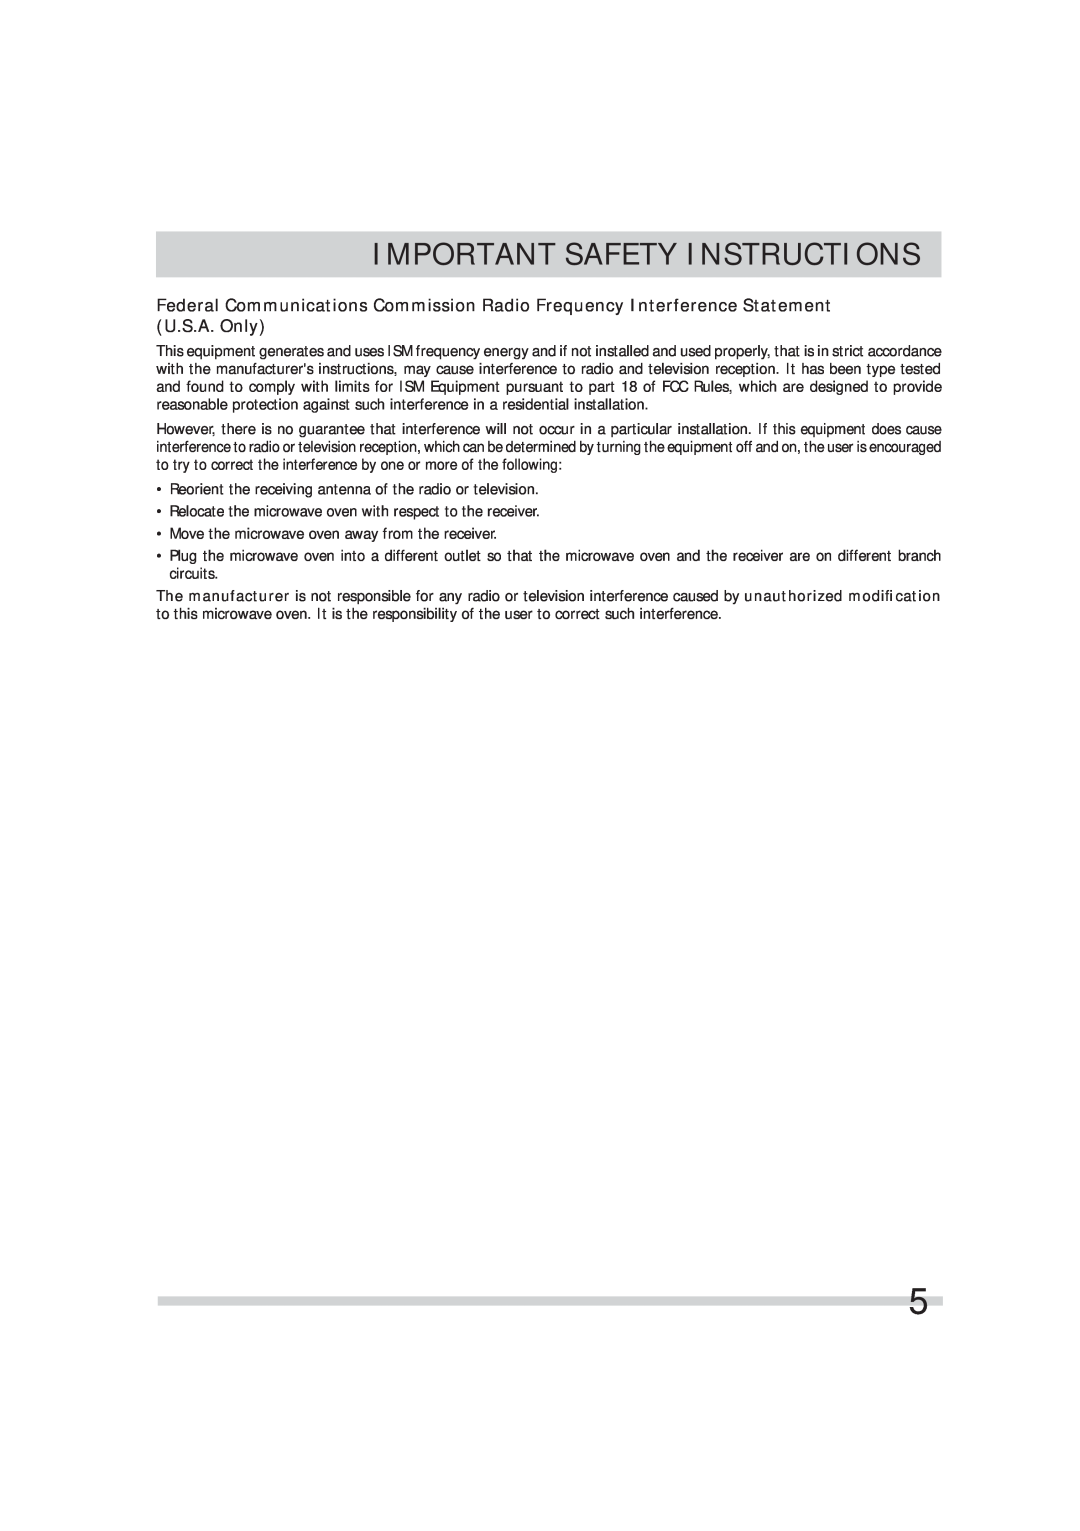 Frigidaire DGMV174KF, FGMV174KF Important Safety Instructions, Reorient the receiving antenna of the radio or television 